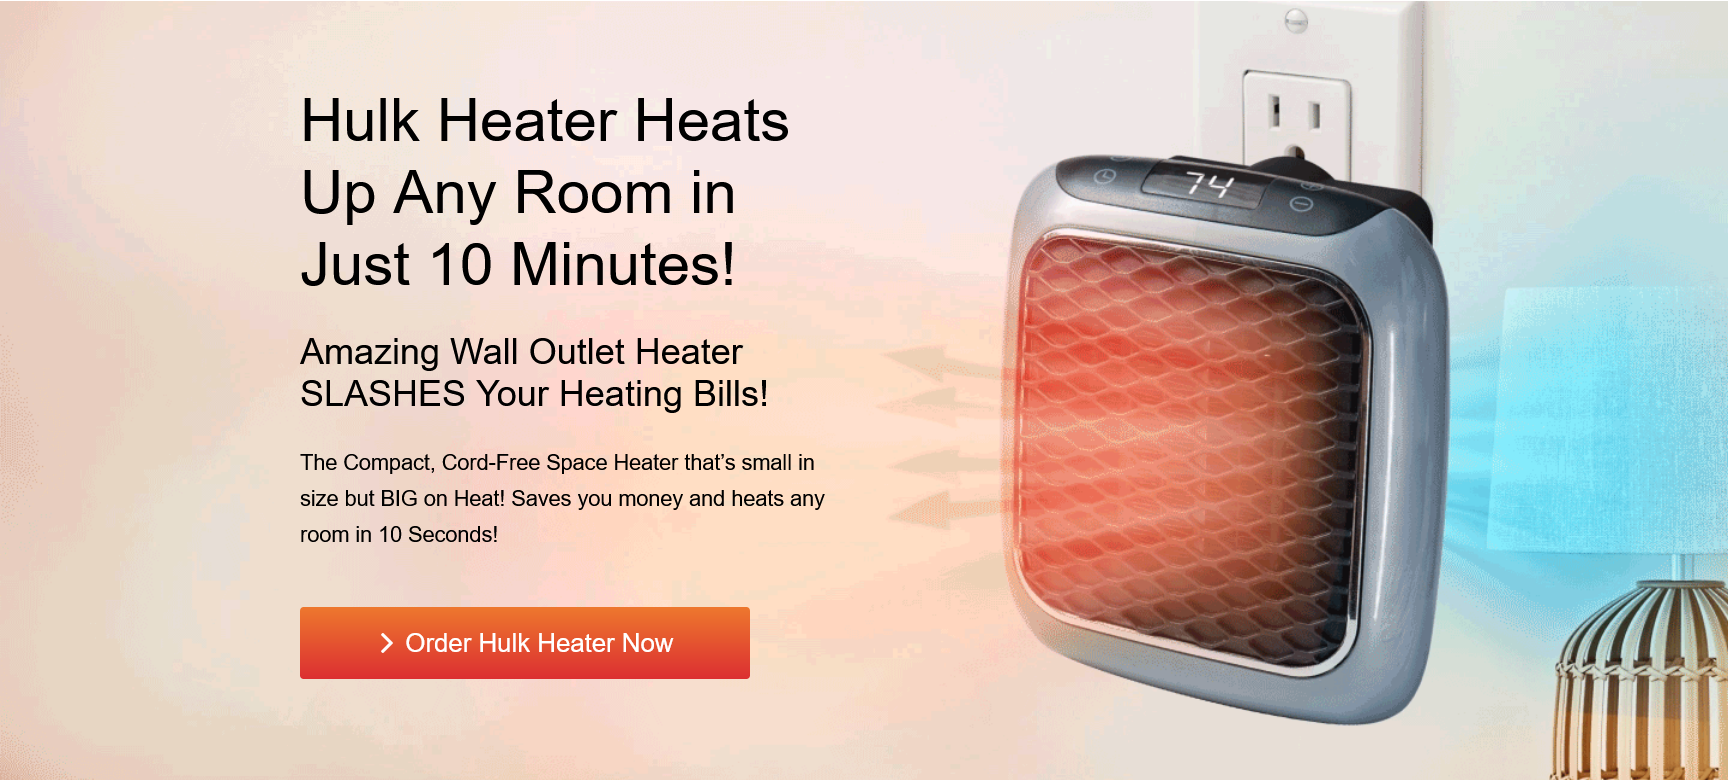 Hulk Heater Launches Ultimate Wall Outlet Heater